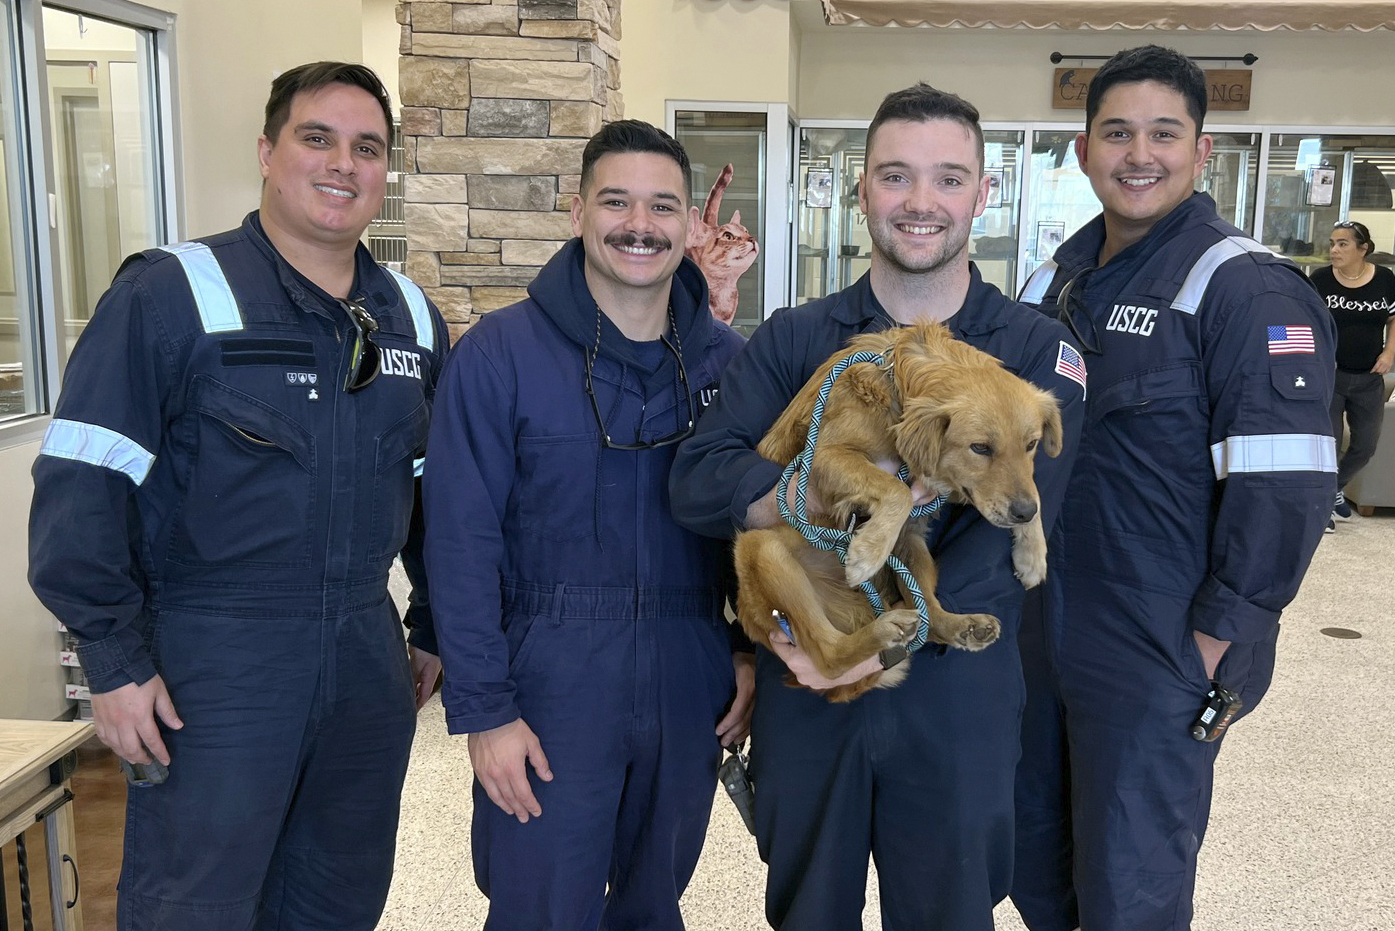 This image released by the U.S. Coast Guard, shows Connie the container dog, Wednesday with the four marine inspectors from the U.S. Coast Guard Sector Houston-Galveston who rescued her.